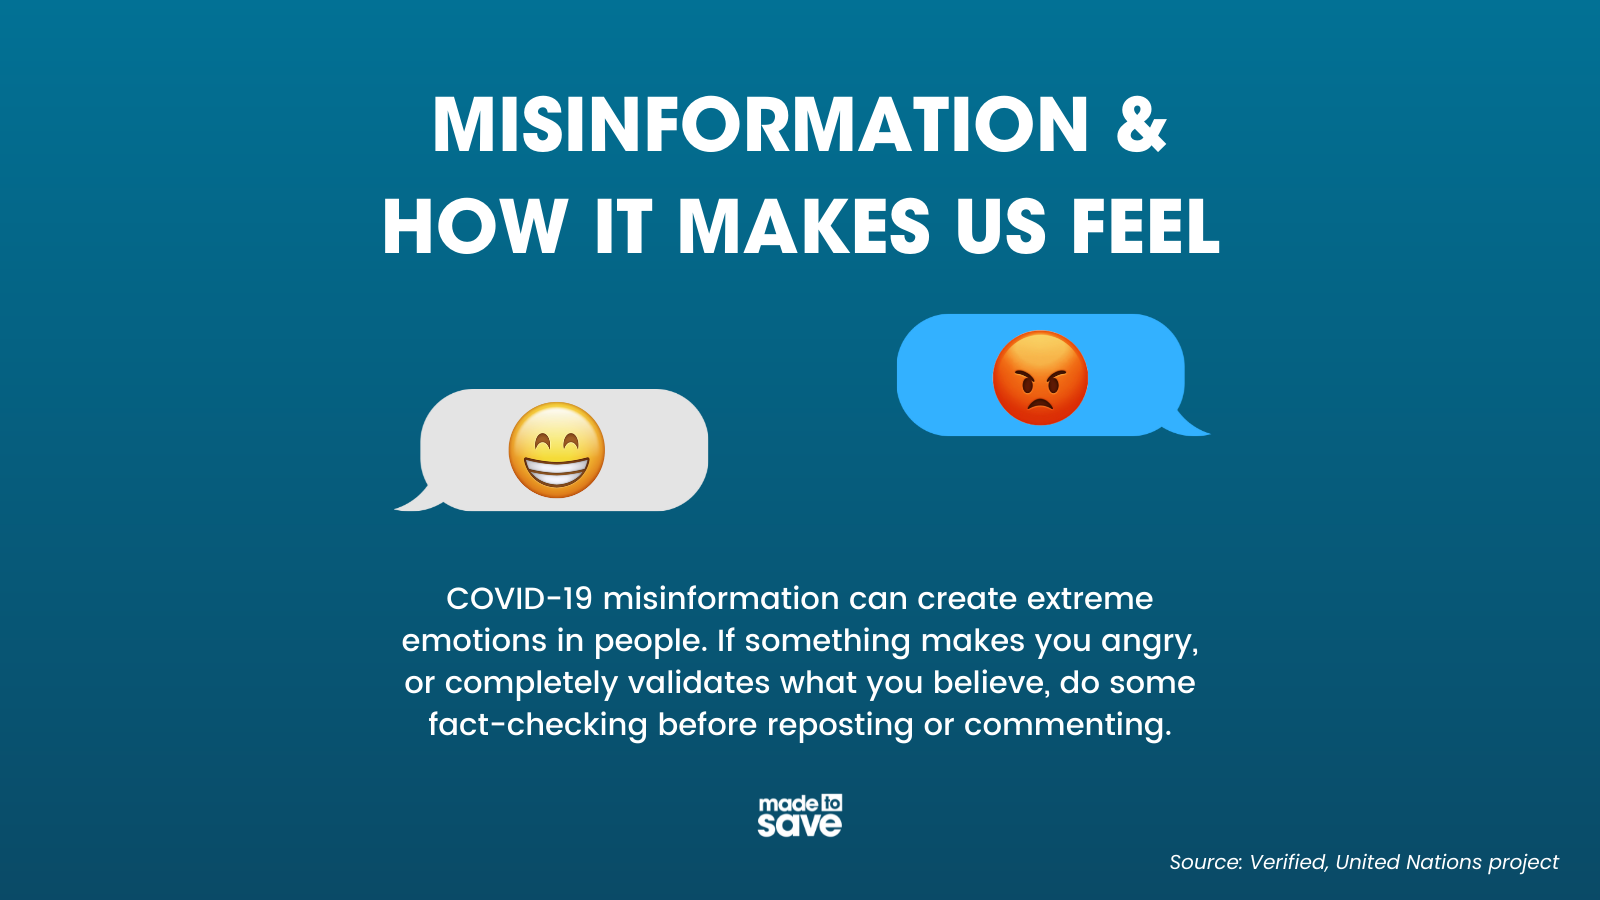 Graphic with blue background. Two text messages are centered -- one with a happy emoji, and one with a mad emoji. In white text, the graphic reads: "Misinformation and How it Makes us Feel: COVID-19 misinformation can create extreme emotions in people. If something makes you angry, or completely validates what you believe, do some fact-checking before reposting or commenting." The source for this information is Verified, a United Nations project. The Made to Save logo is centered at the bottom of the graphic.